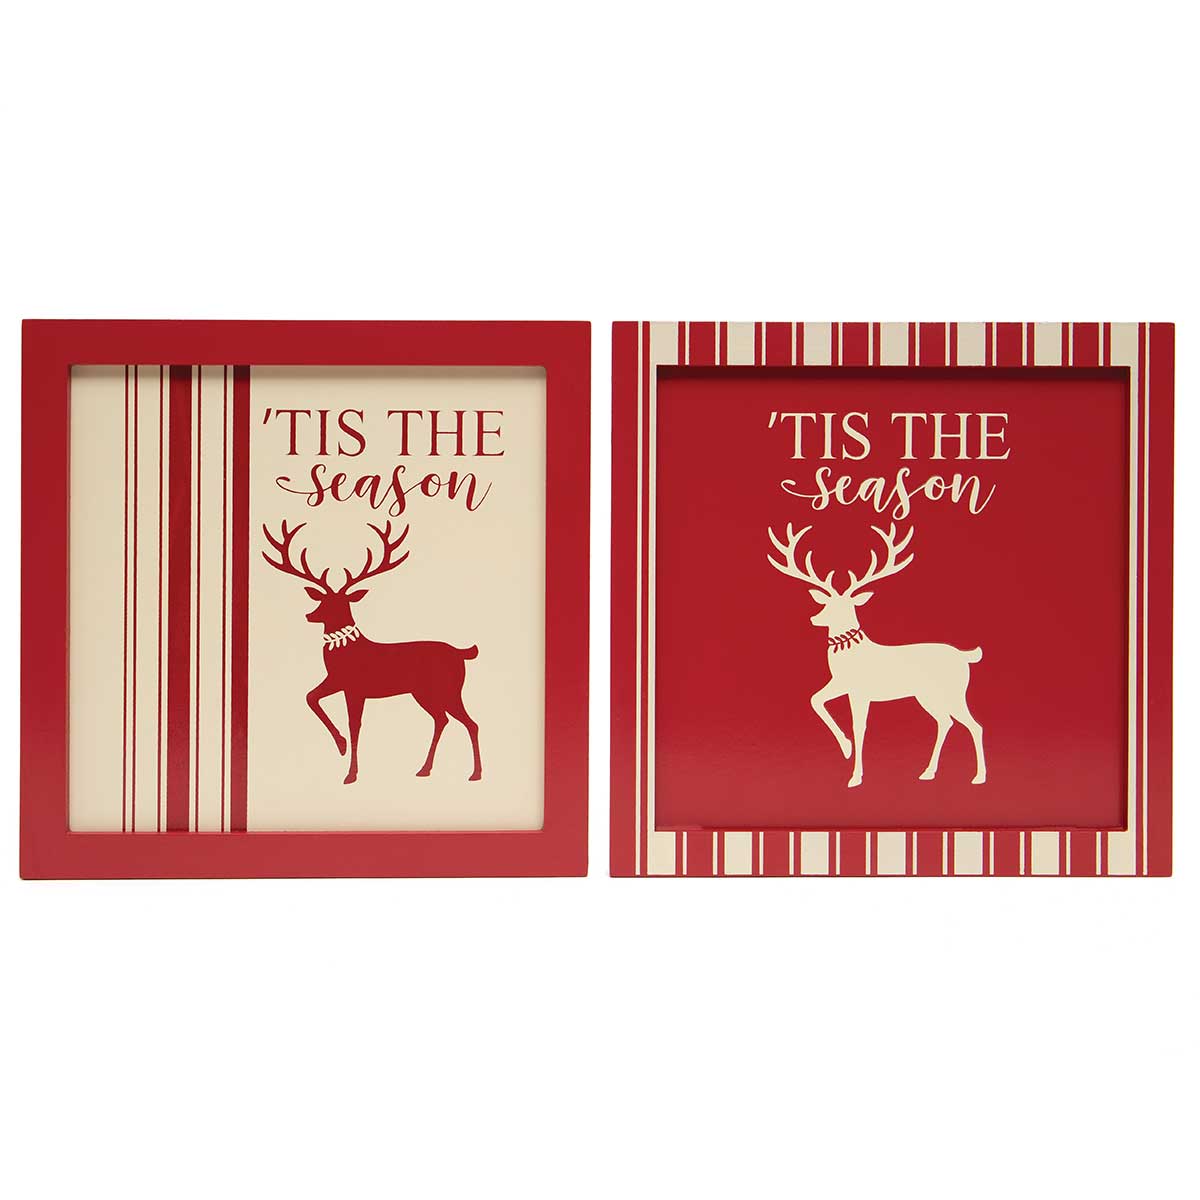 !TICKING TIS THE SEASON SQUARE WOOD SIGN RED/CREAM WITH